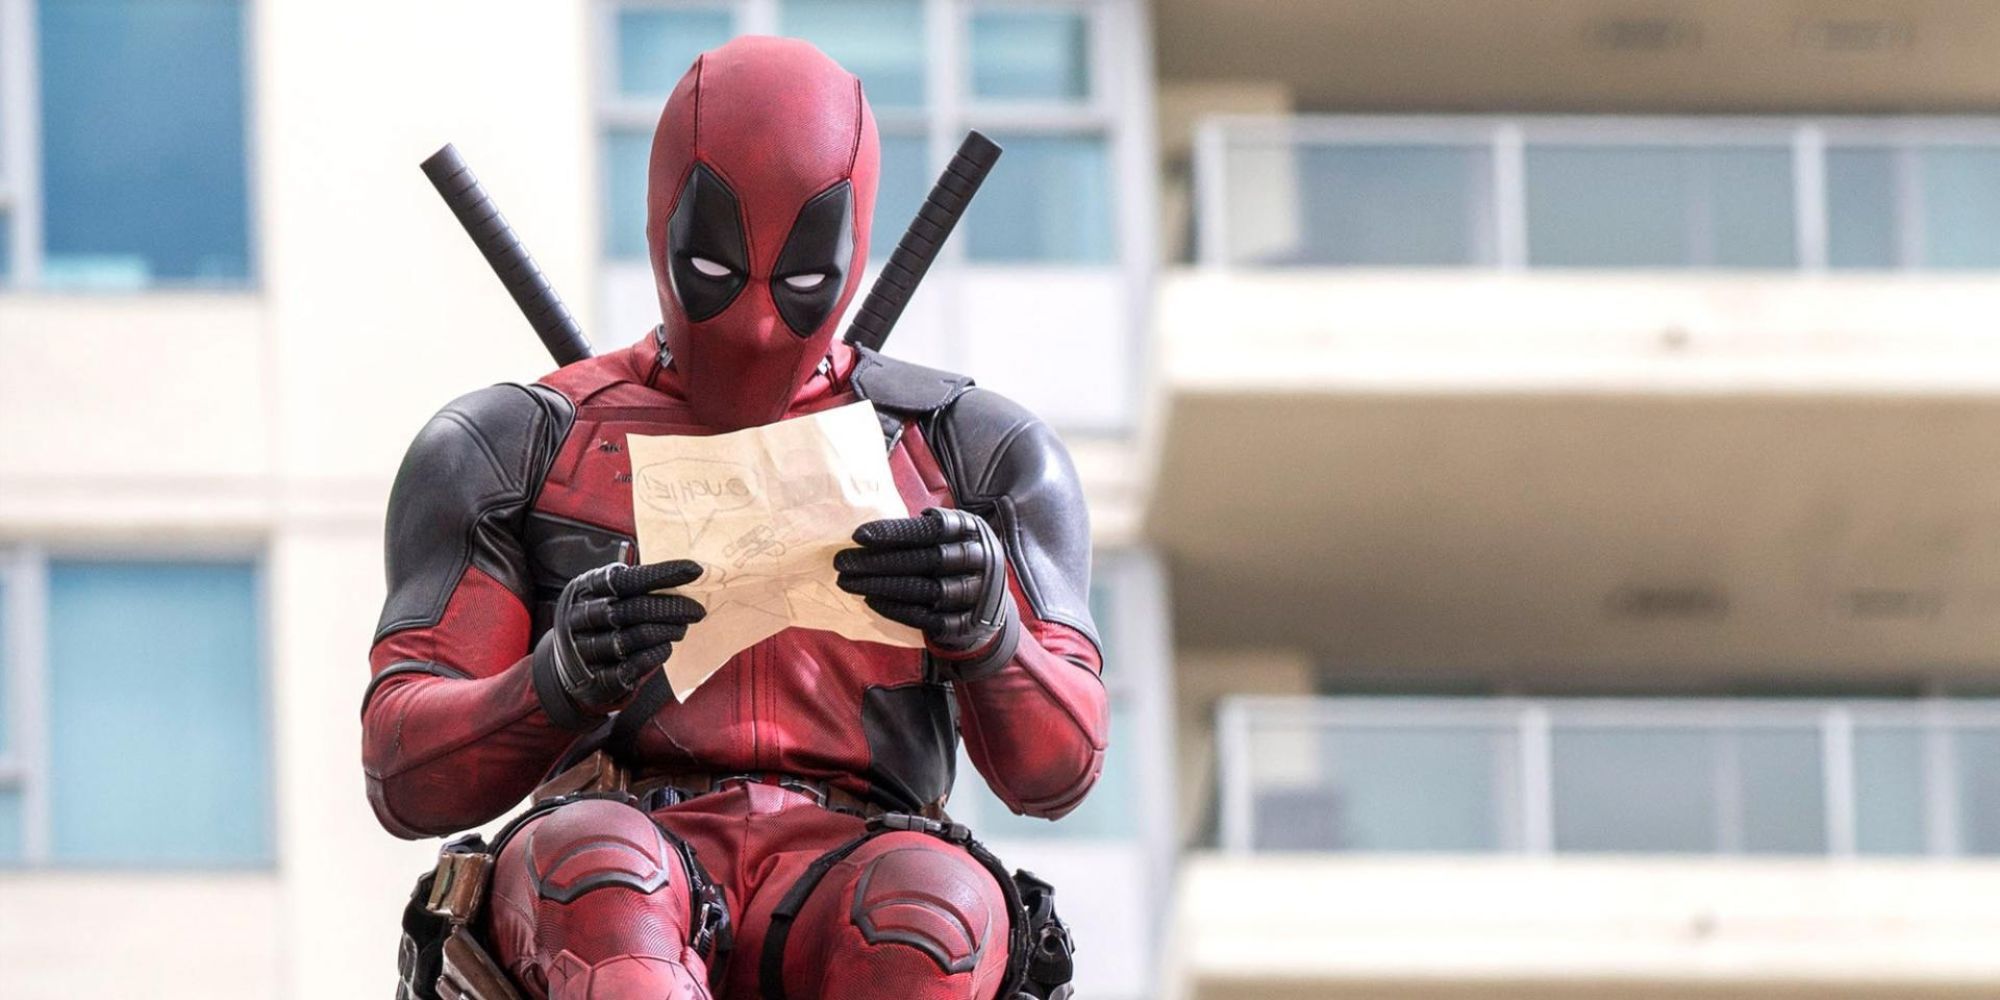 Still image from Deadpool, featuring Deadpool reading a letter.